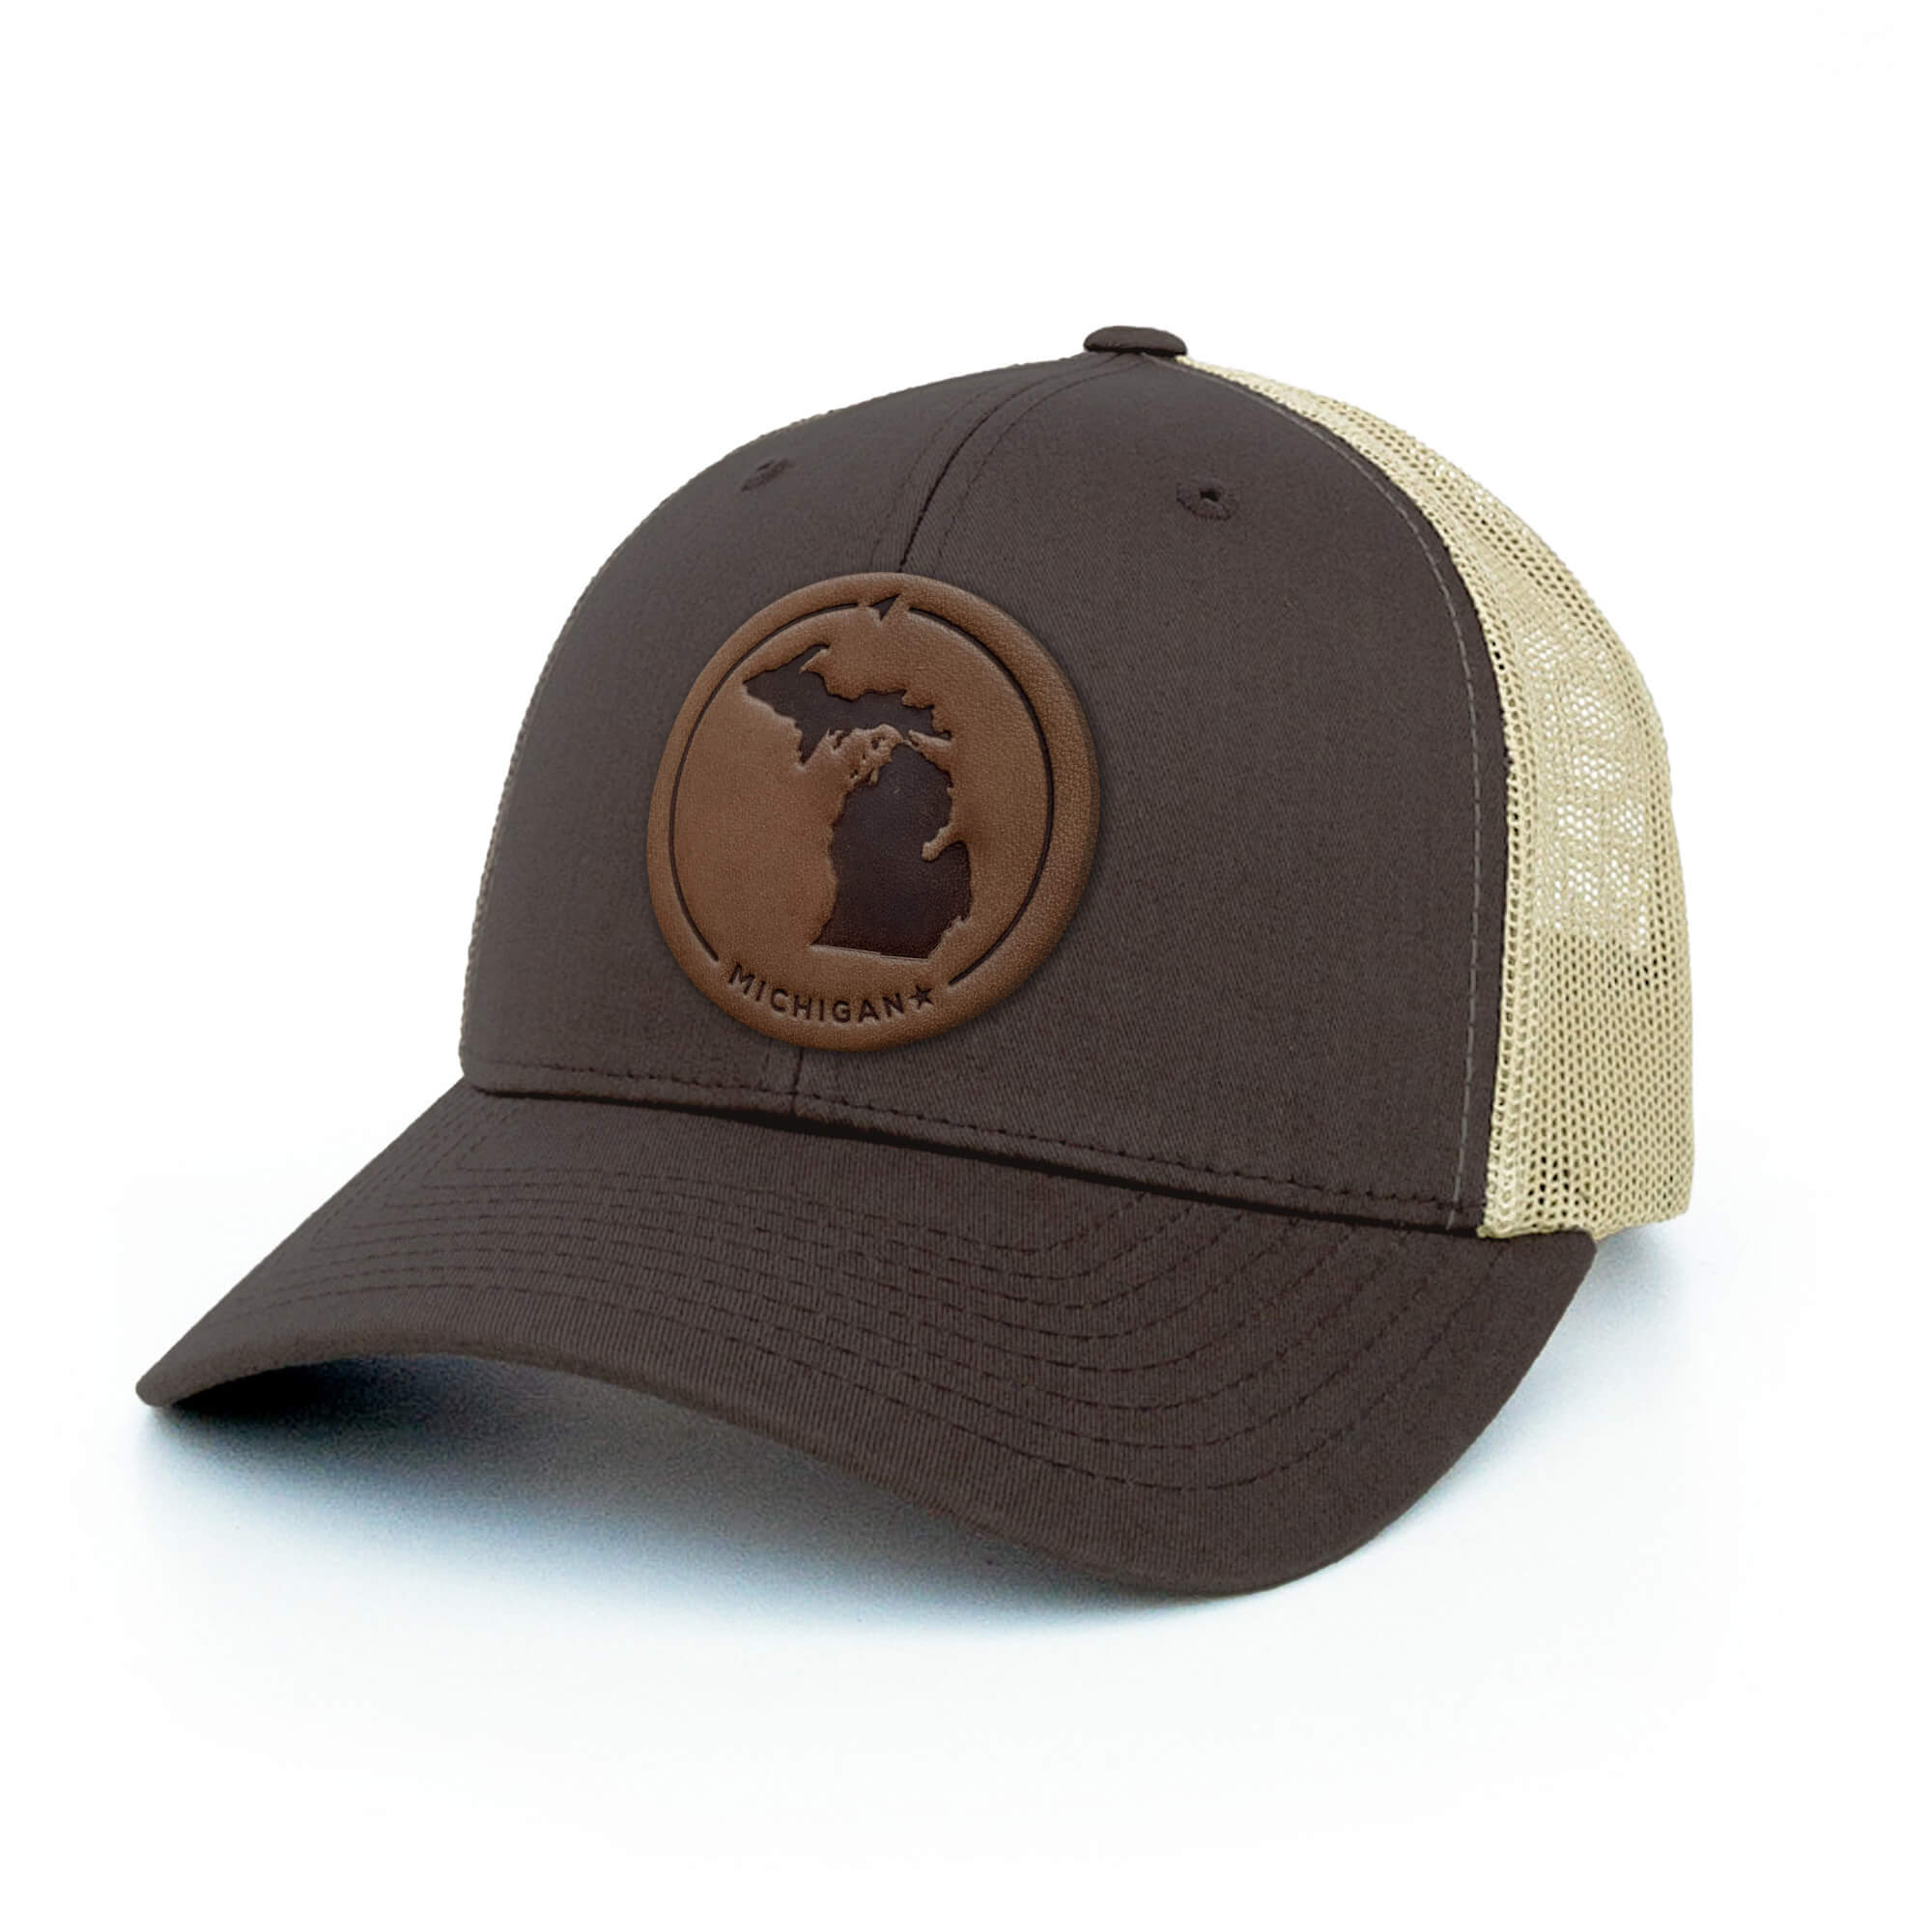 Brown and khaki trucker hat with full-grain leather patch of a Michigan | BLACK-003-007, CHARC-003-007, NAVY-003-007, HGREY-003-007, MOSS-003-007, BROWN-003-007